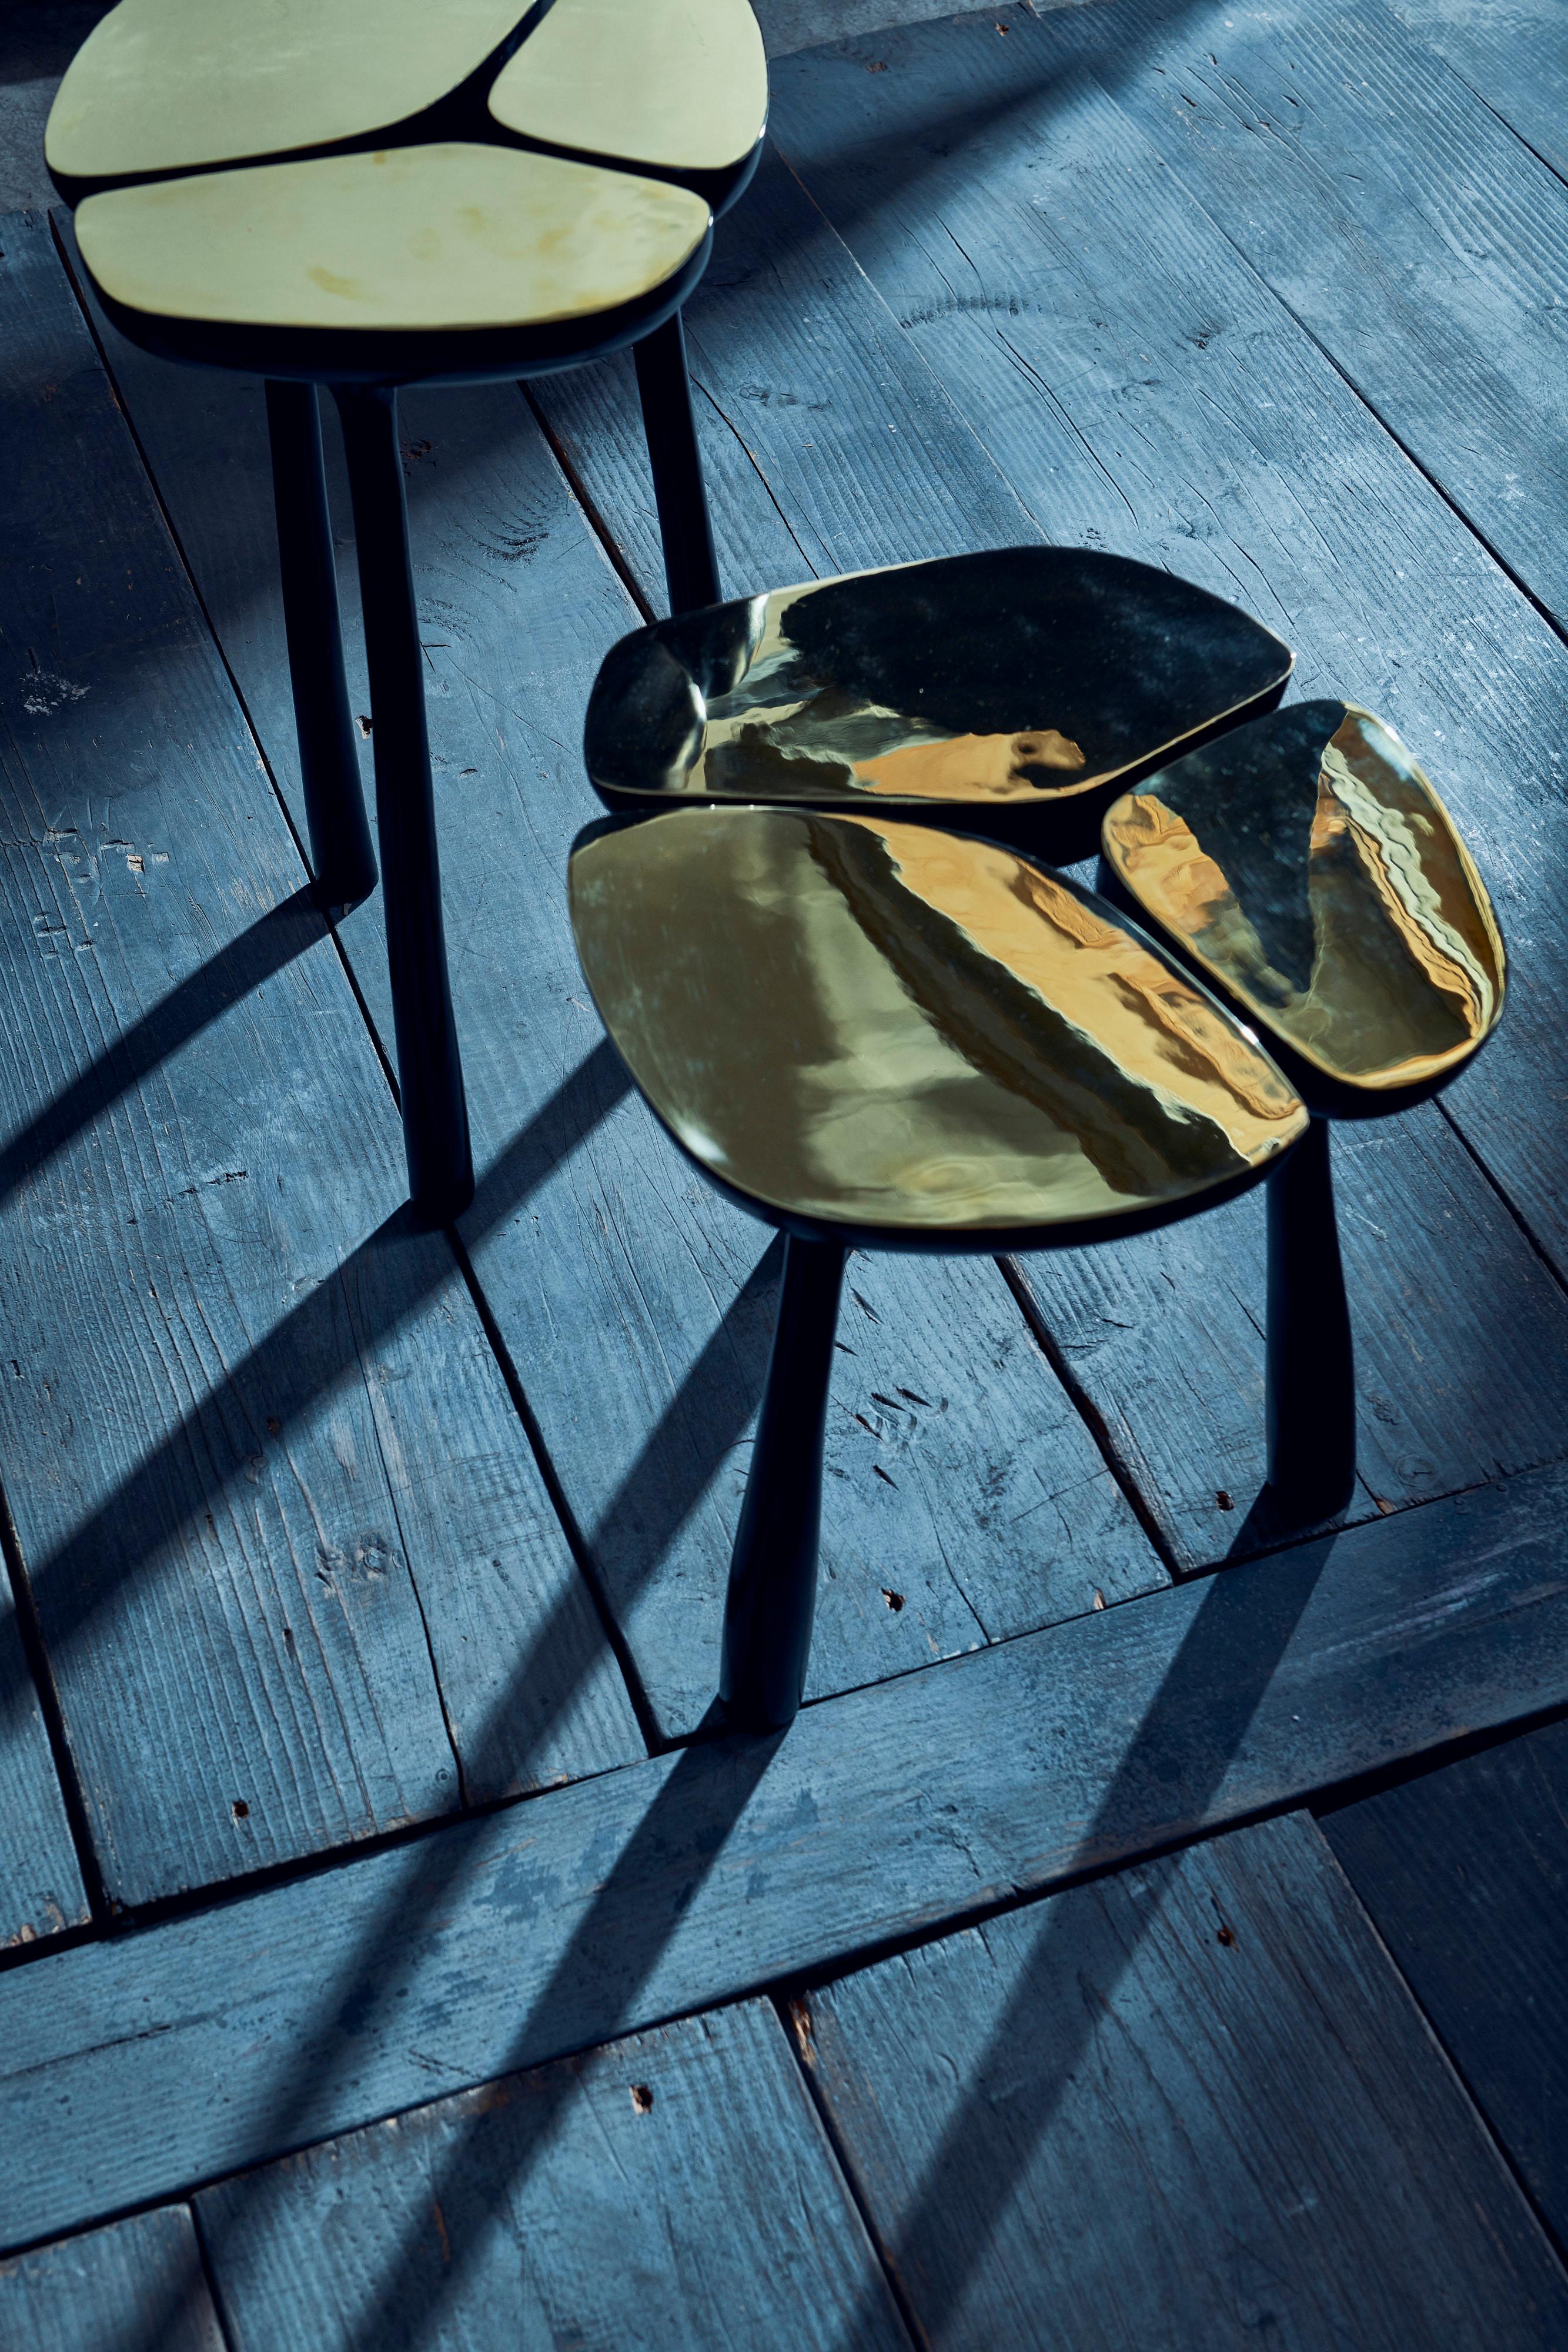 Low Bronze Jasper Side Table in Gold Bronze and Dark Bronze by Elan Atelier

Sculptural Low Jasper side table in polished gold bronze and dark bronze inspired by contemporary sculptural forms. The top surface is in a polished gold bronze in a brass